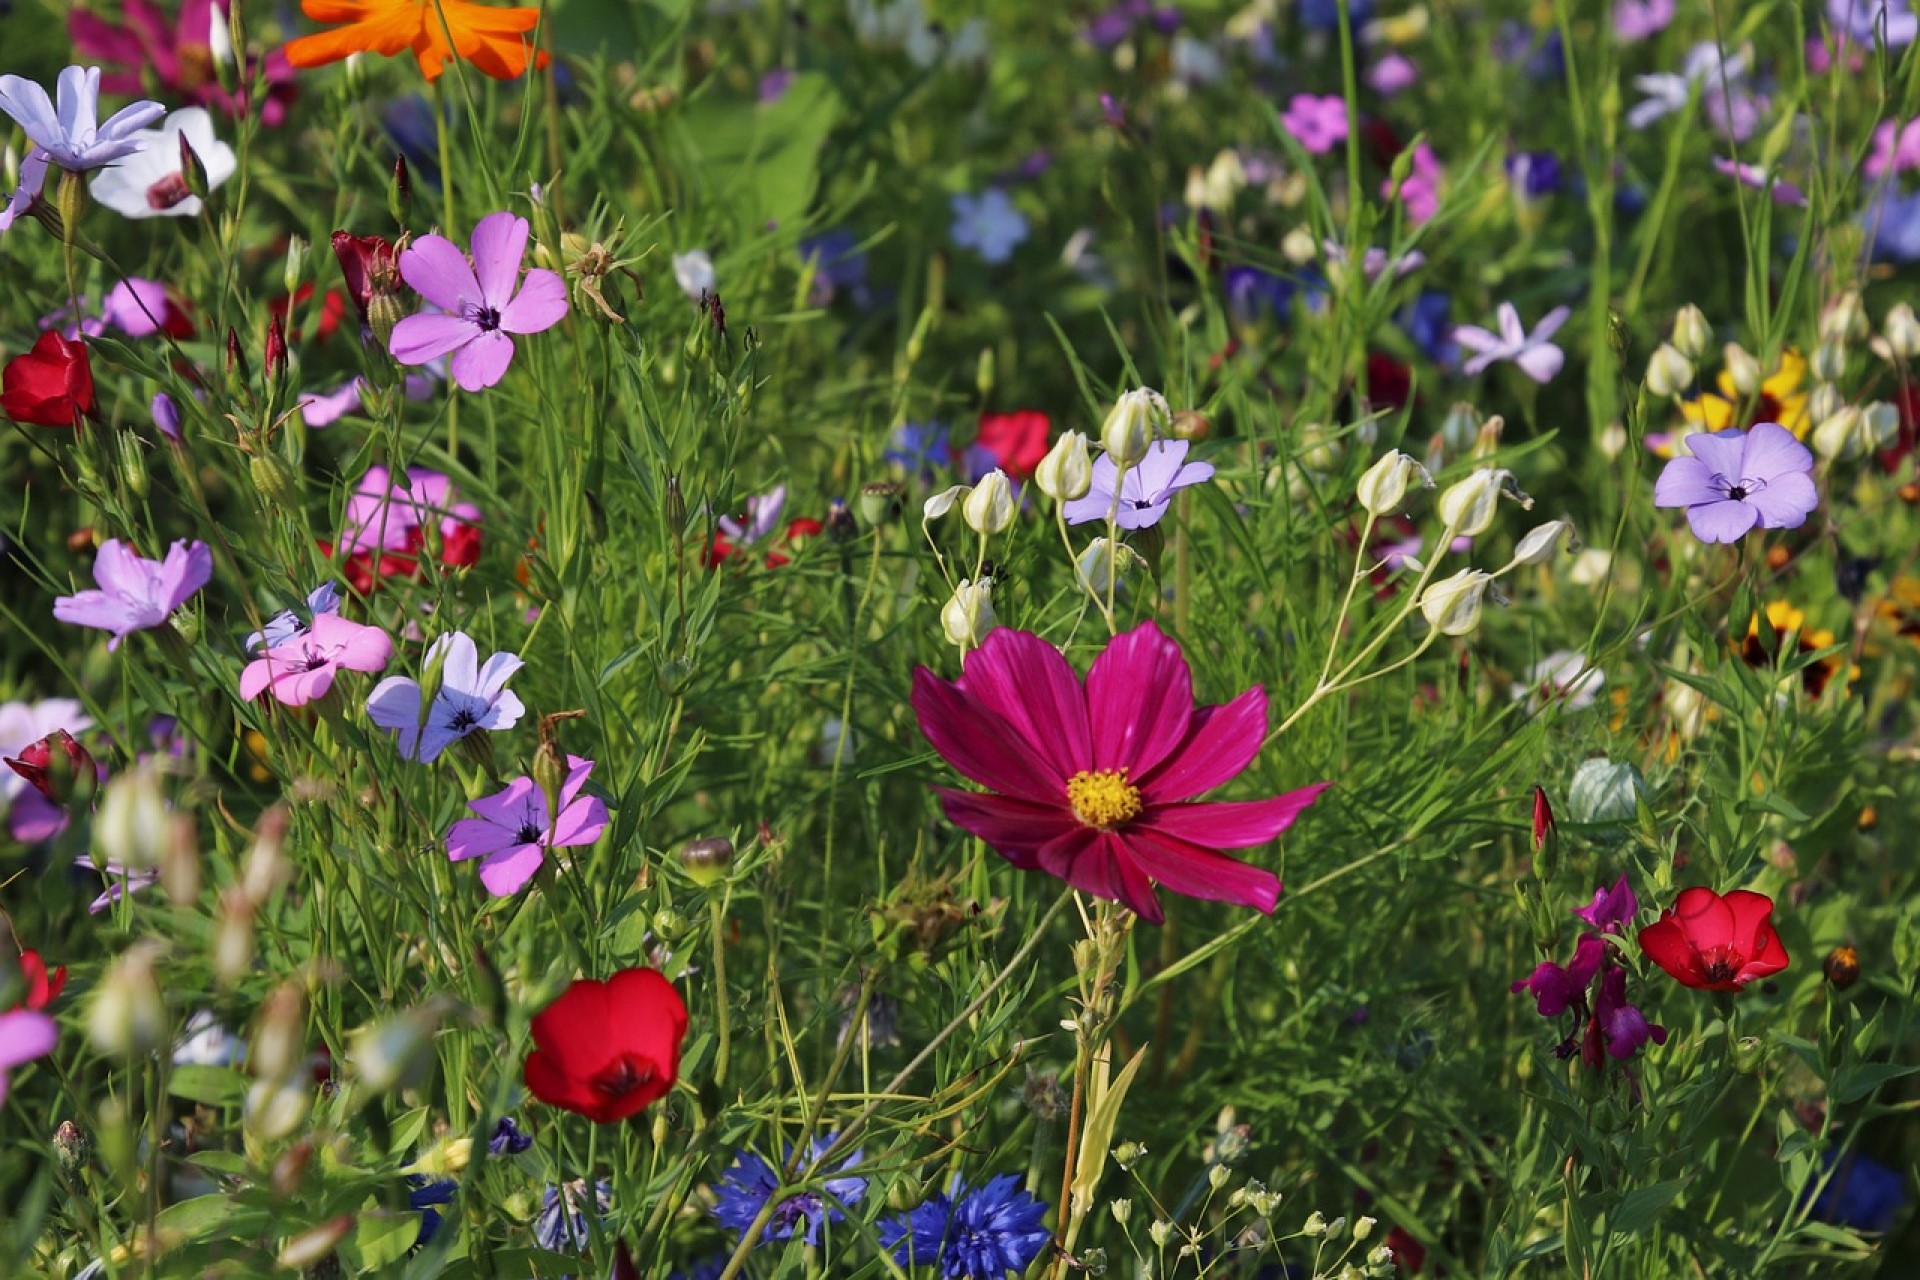 How to Increase Genetic Diversity Through Native Gardening | Plant diversity is currently threatened, but the right gardening methods can help to combat the problem.